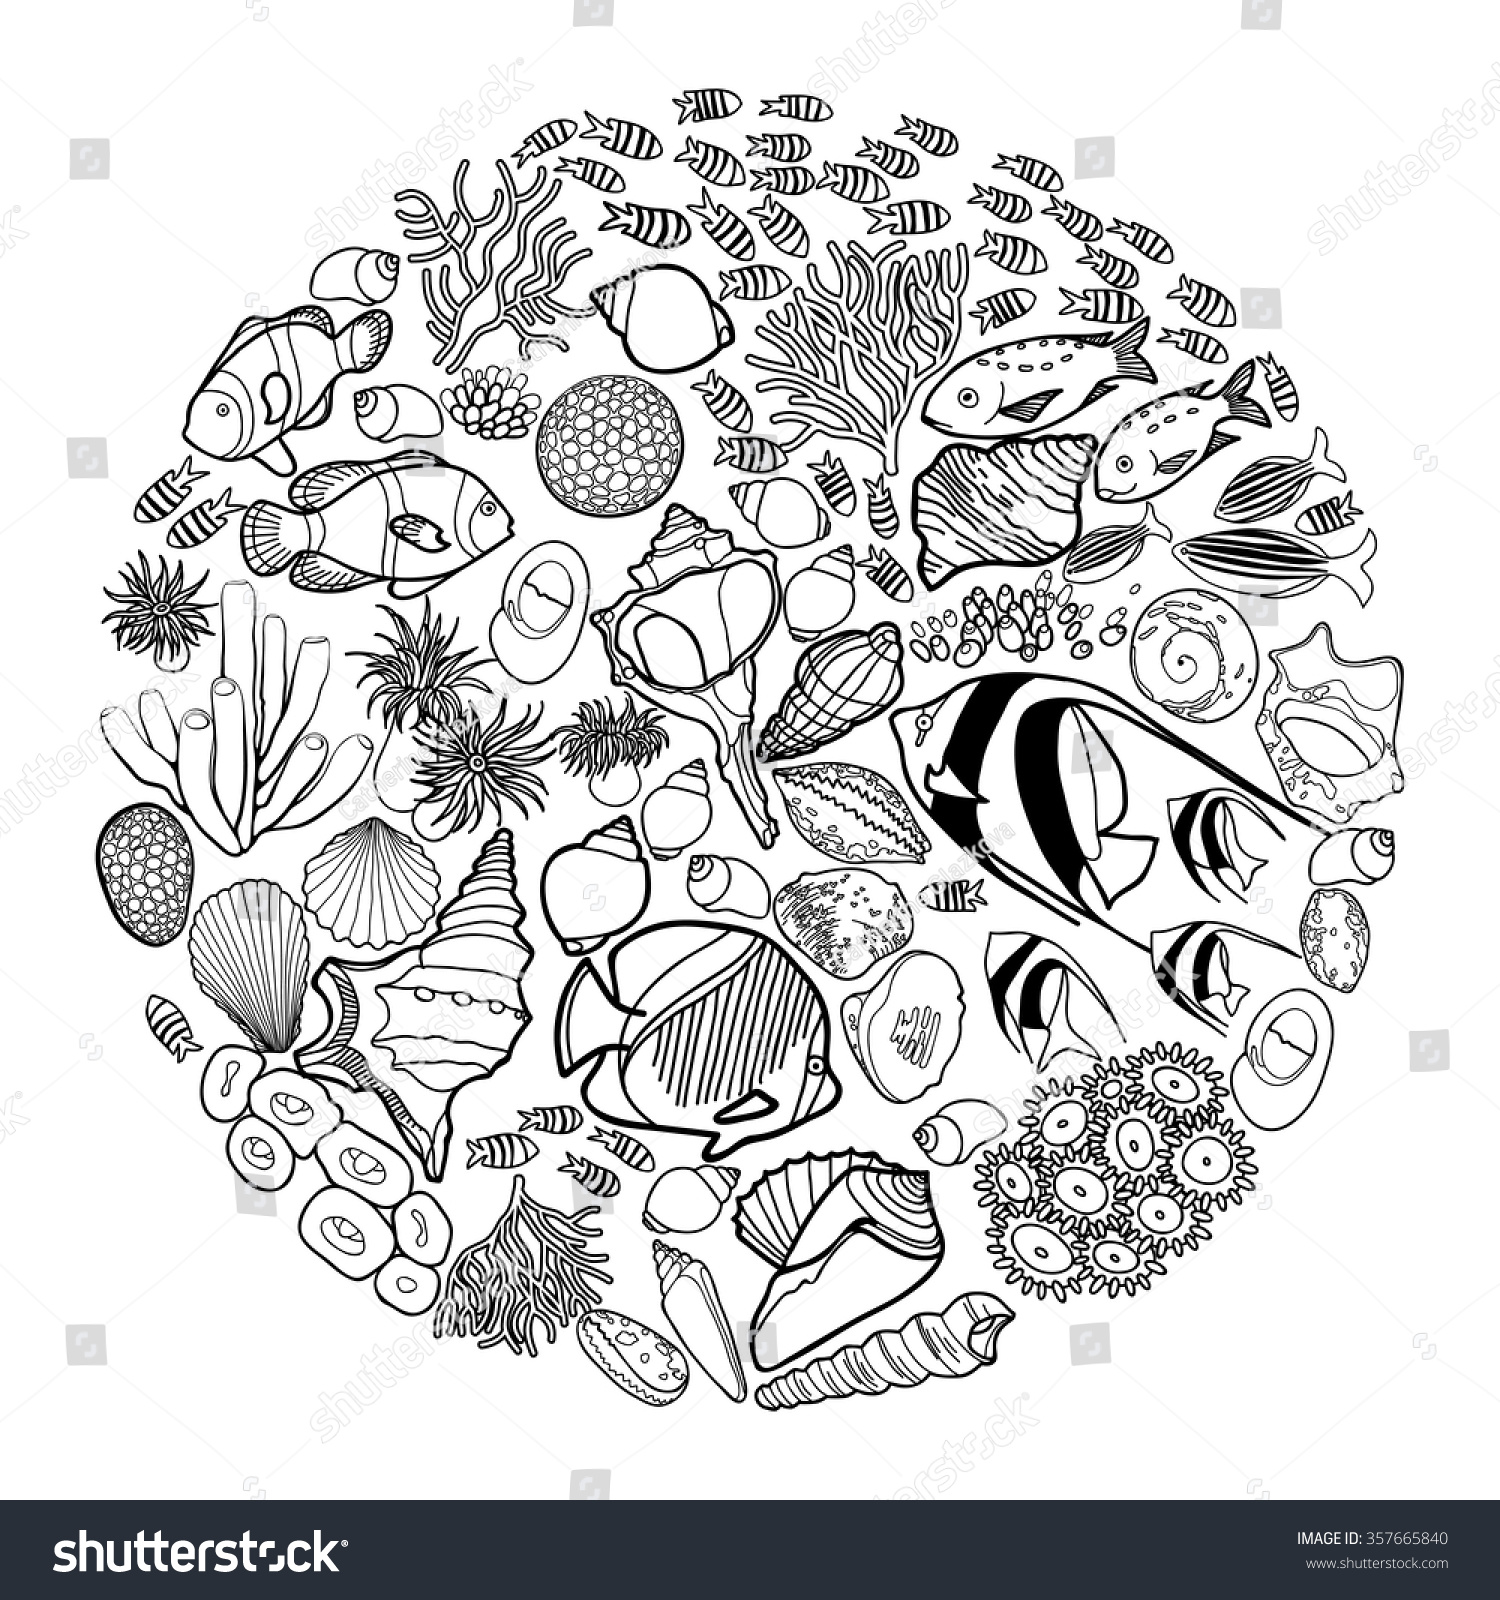 Royalty Free Ocean Flora And Fauna In The Circle 357665840 Stock